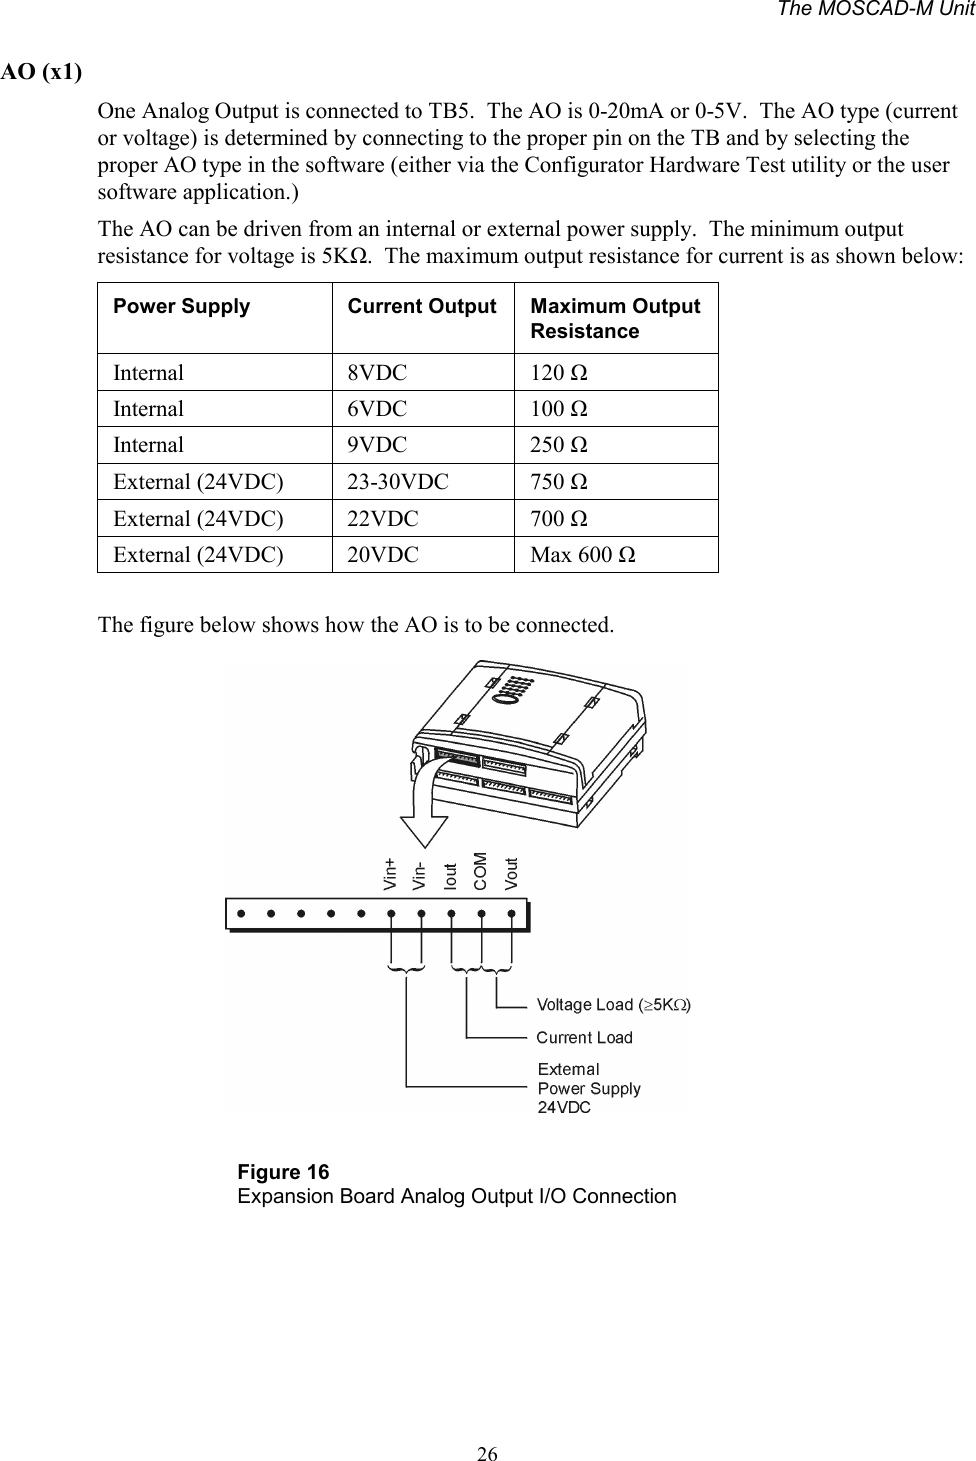 The MOSCAD-M Unit26AO (x1)One Analog Output is connected to TB5.  The AO is 0-20mA or 0-5V.  The AO type (currentor voltage) is determined by connecting to the proper pin on the TB and by selecting theproper AO type in the software (either via the Configurator Hardware Test utility or the usersoftware application.)The AO can be driven from an internal or external power supply.  The minimum outputresistance for voltage is 5KΩ.  The maximum output resistance for current is as shown below:Power Supply Current Output Maximum OutputResistanceInternal 8VDC 120 ΩInternal 6VDC 100 ΩInternal 9VDC 250 ΩExternal (24VDC) 23-30VDC 750 ΩExternal (24VDC) 22VDC 700 ΩExternal (24VDC) 20VDC Max 600 ΩThe figure below shows how the AO is to be connected.Figure 16Expansion Board Analog Output I/O Connection